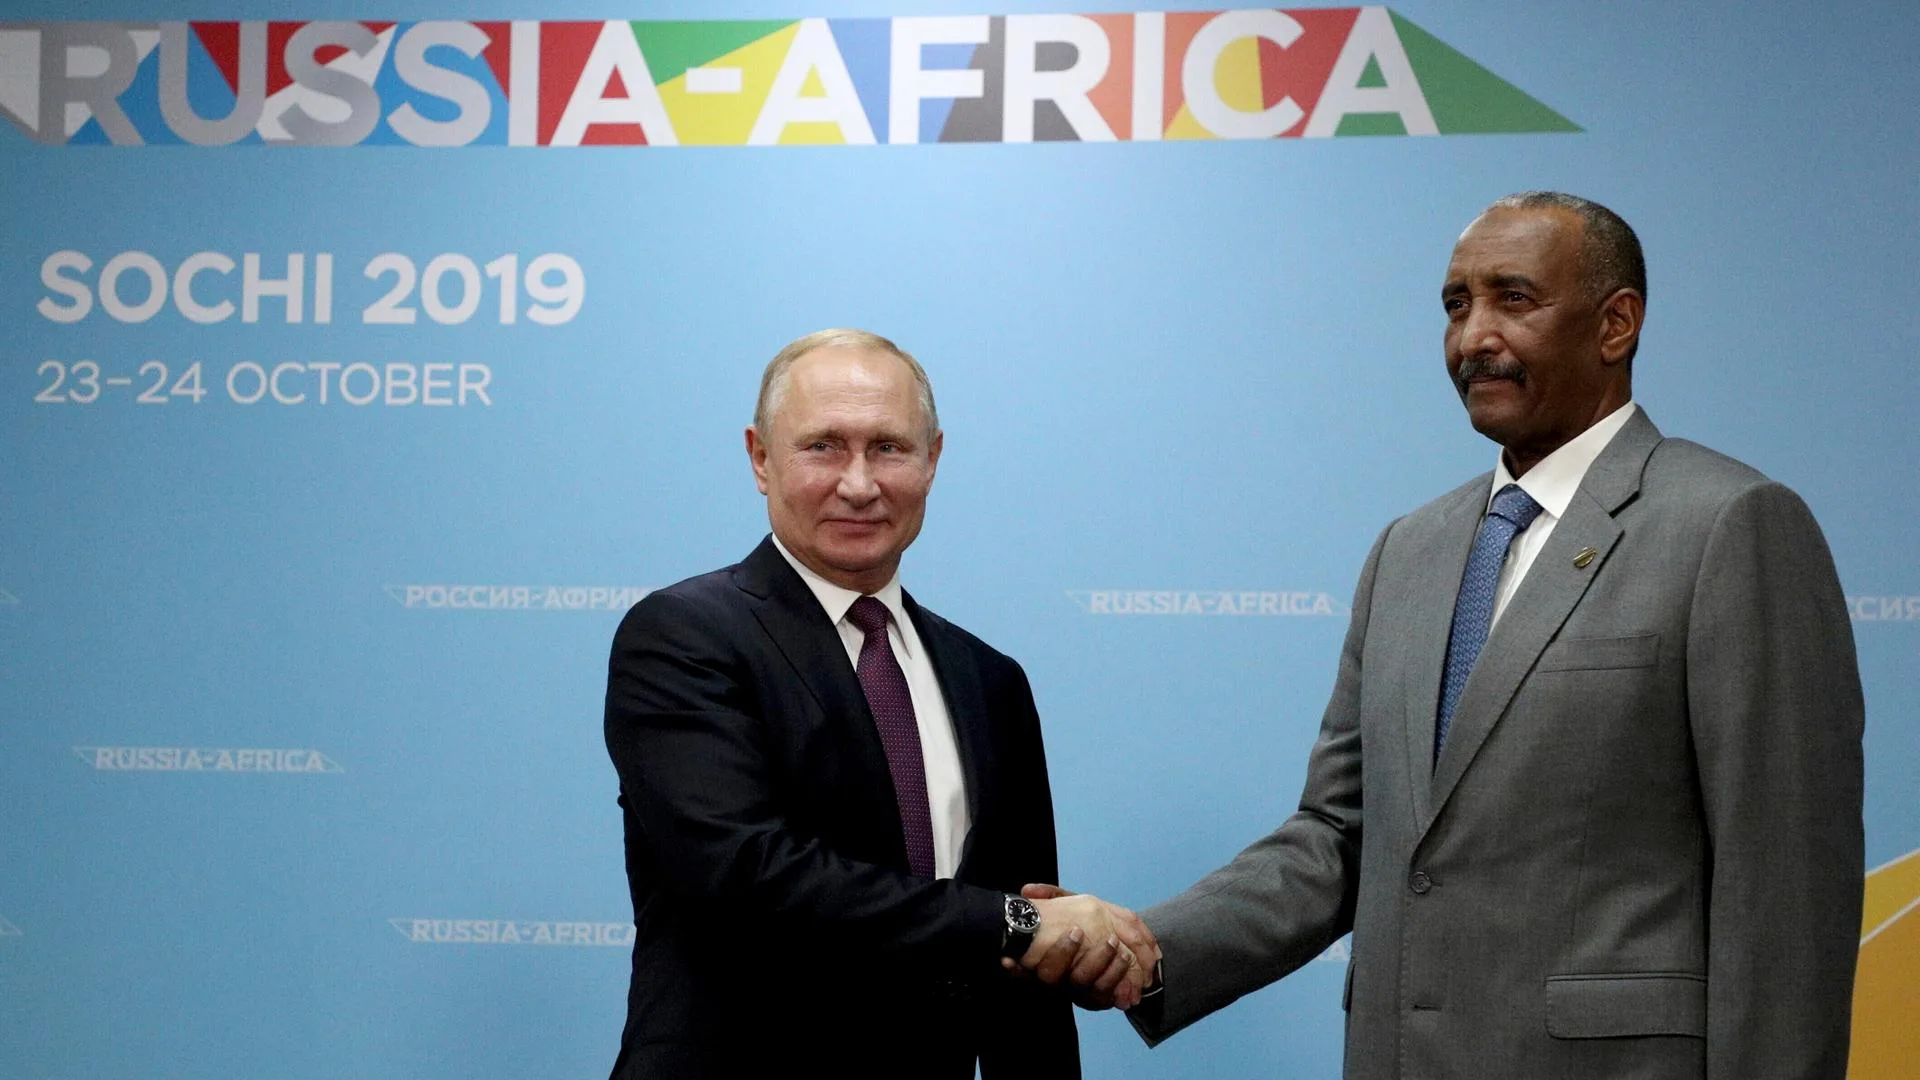 Russias-influence-deepens-as-Sudan-remains-ignored-by-western-powers